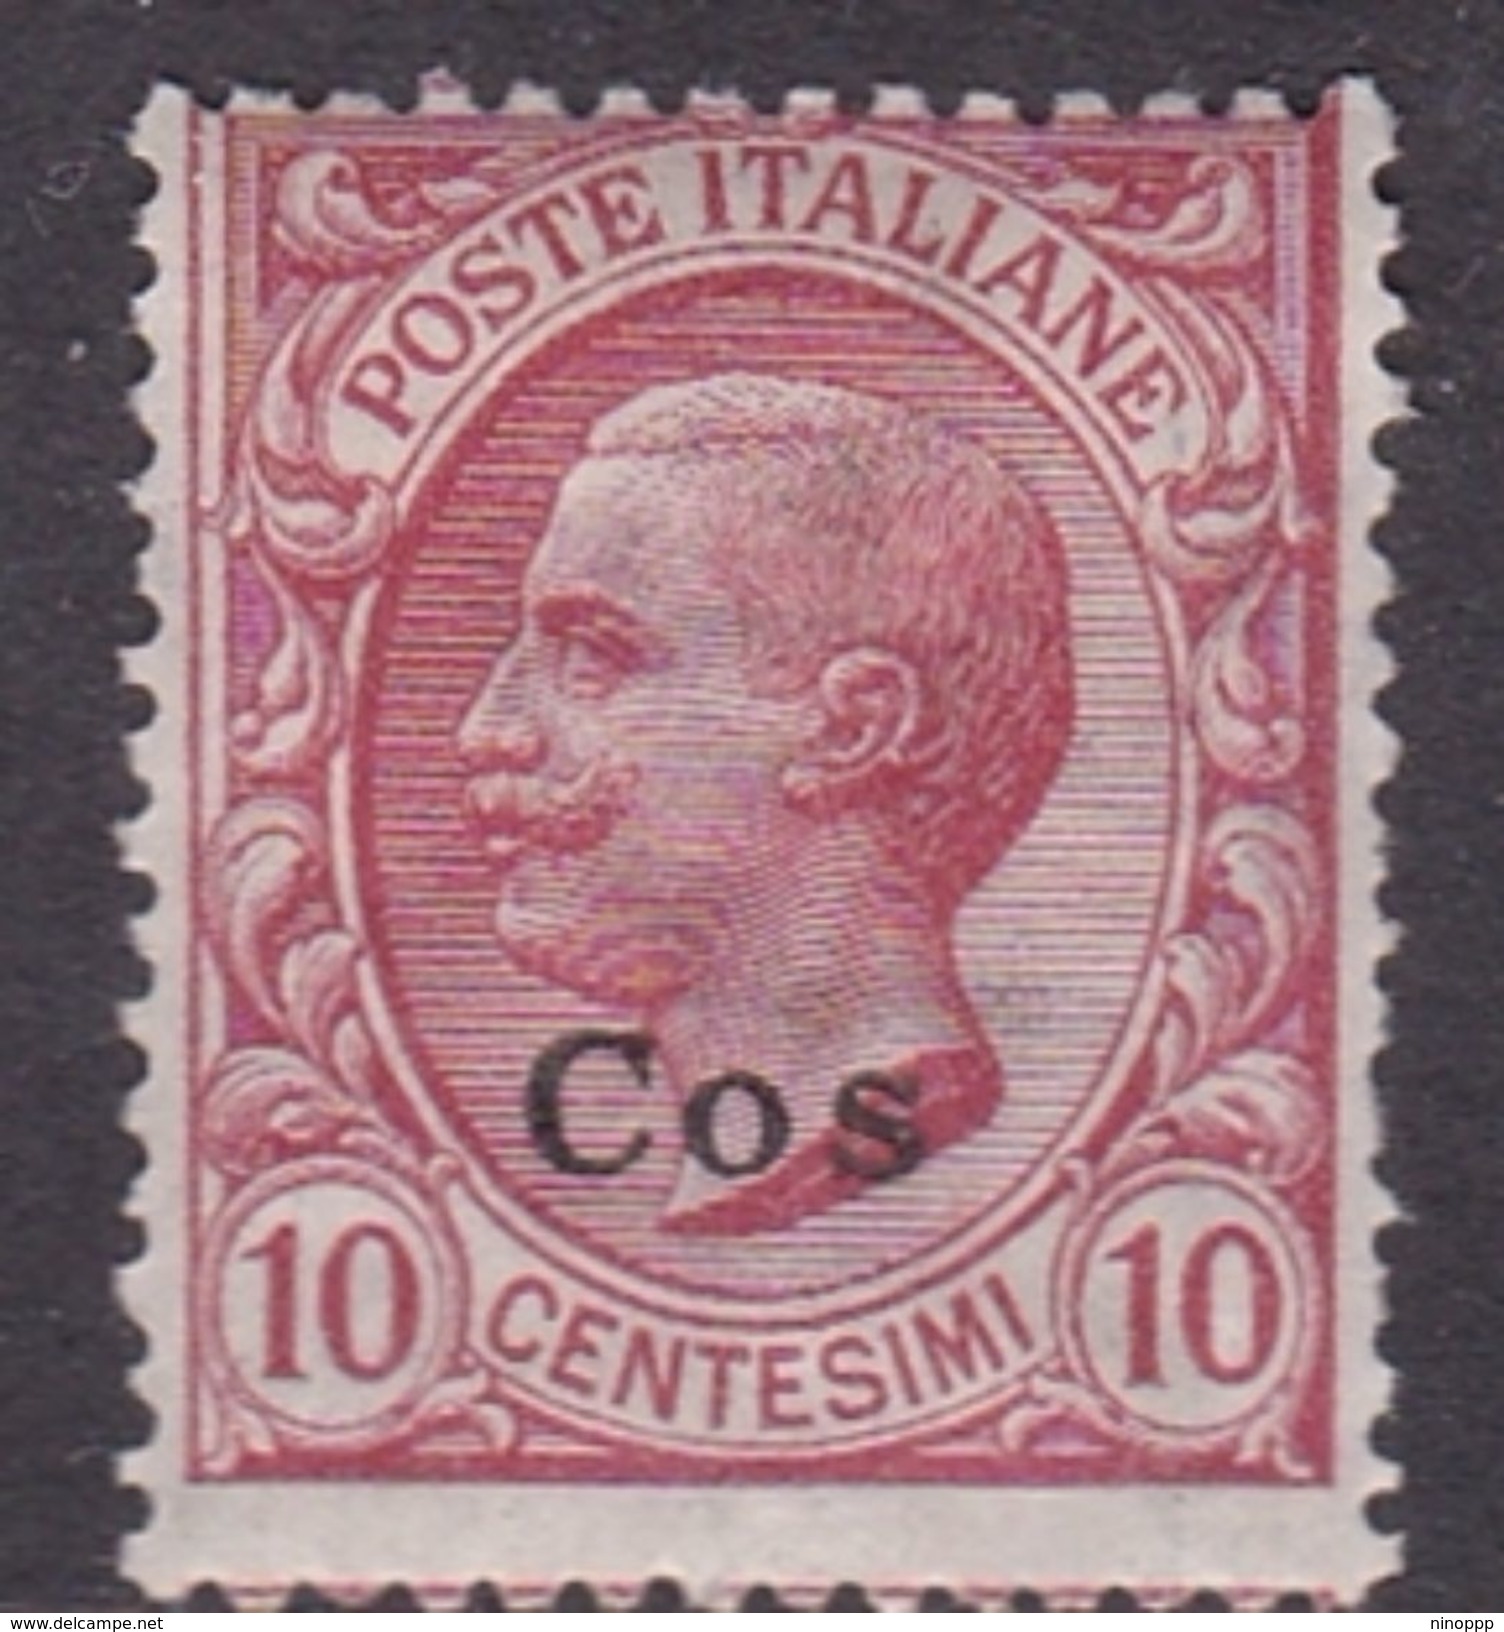 Italy-Colonies And Territories-Aegean-Coo S 3  1912 10 Claret MH - Aegean (Coo)